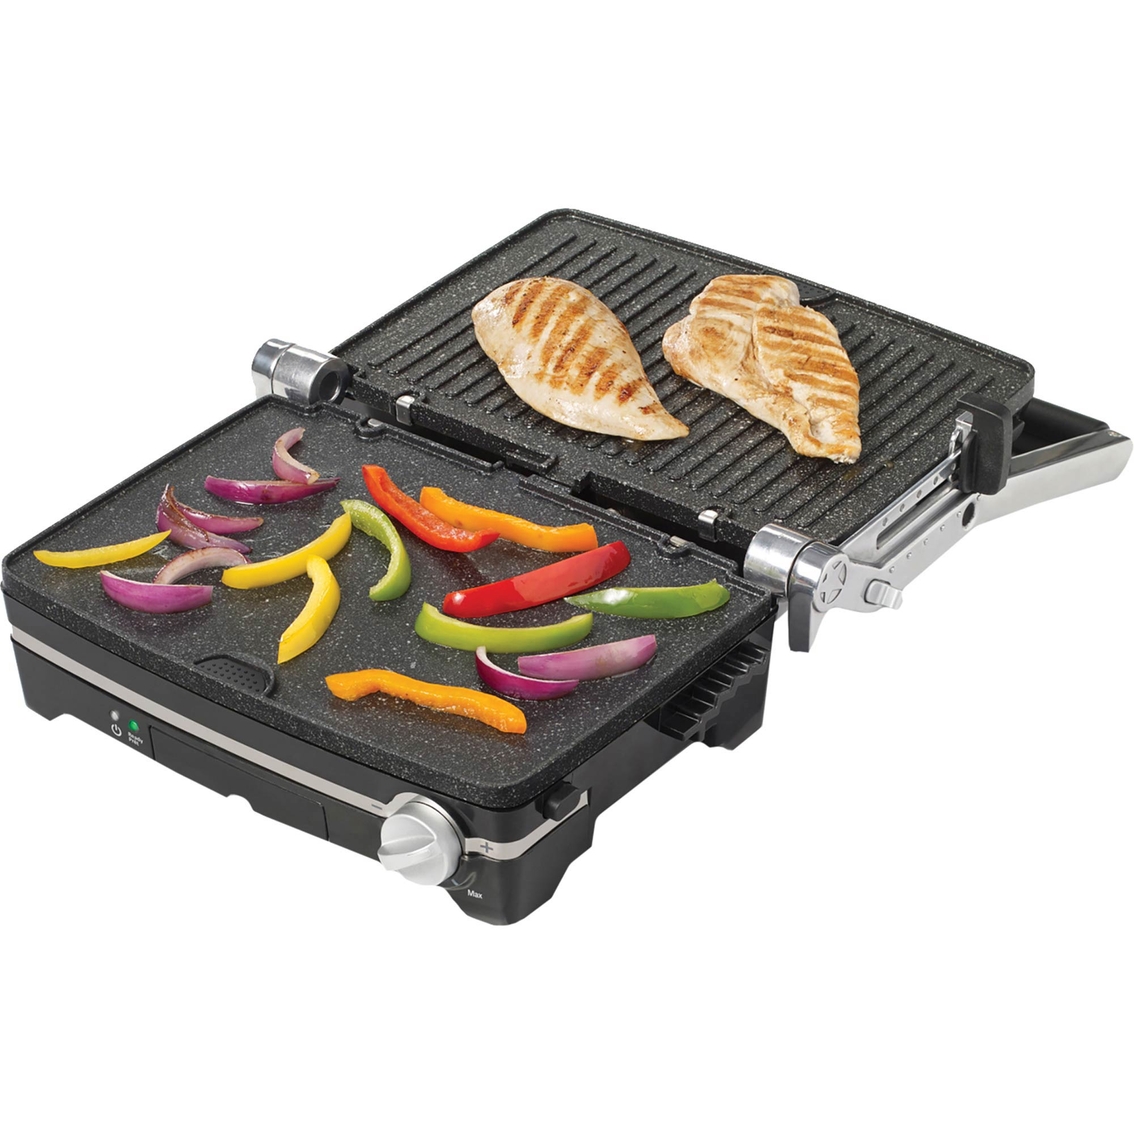 Starfrit The Rock 1,500W Panini Maker with Reversible Plates - Image 6 of 6